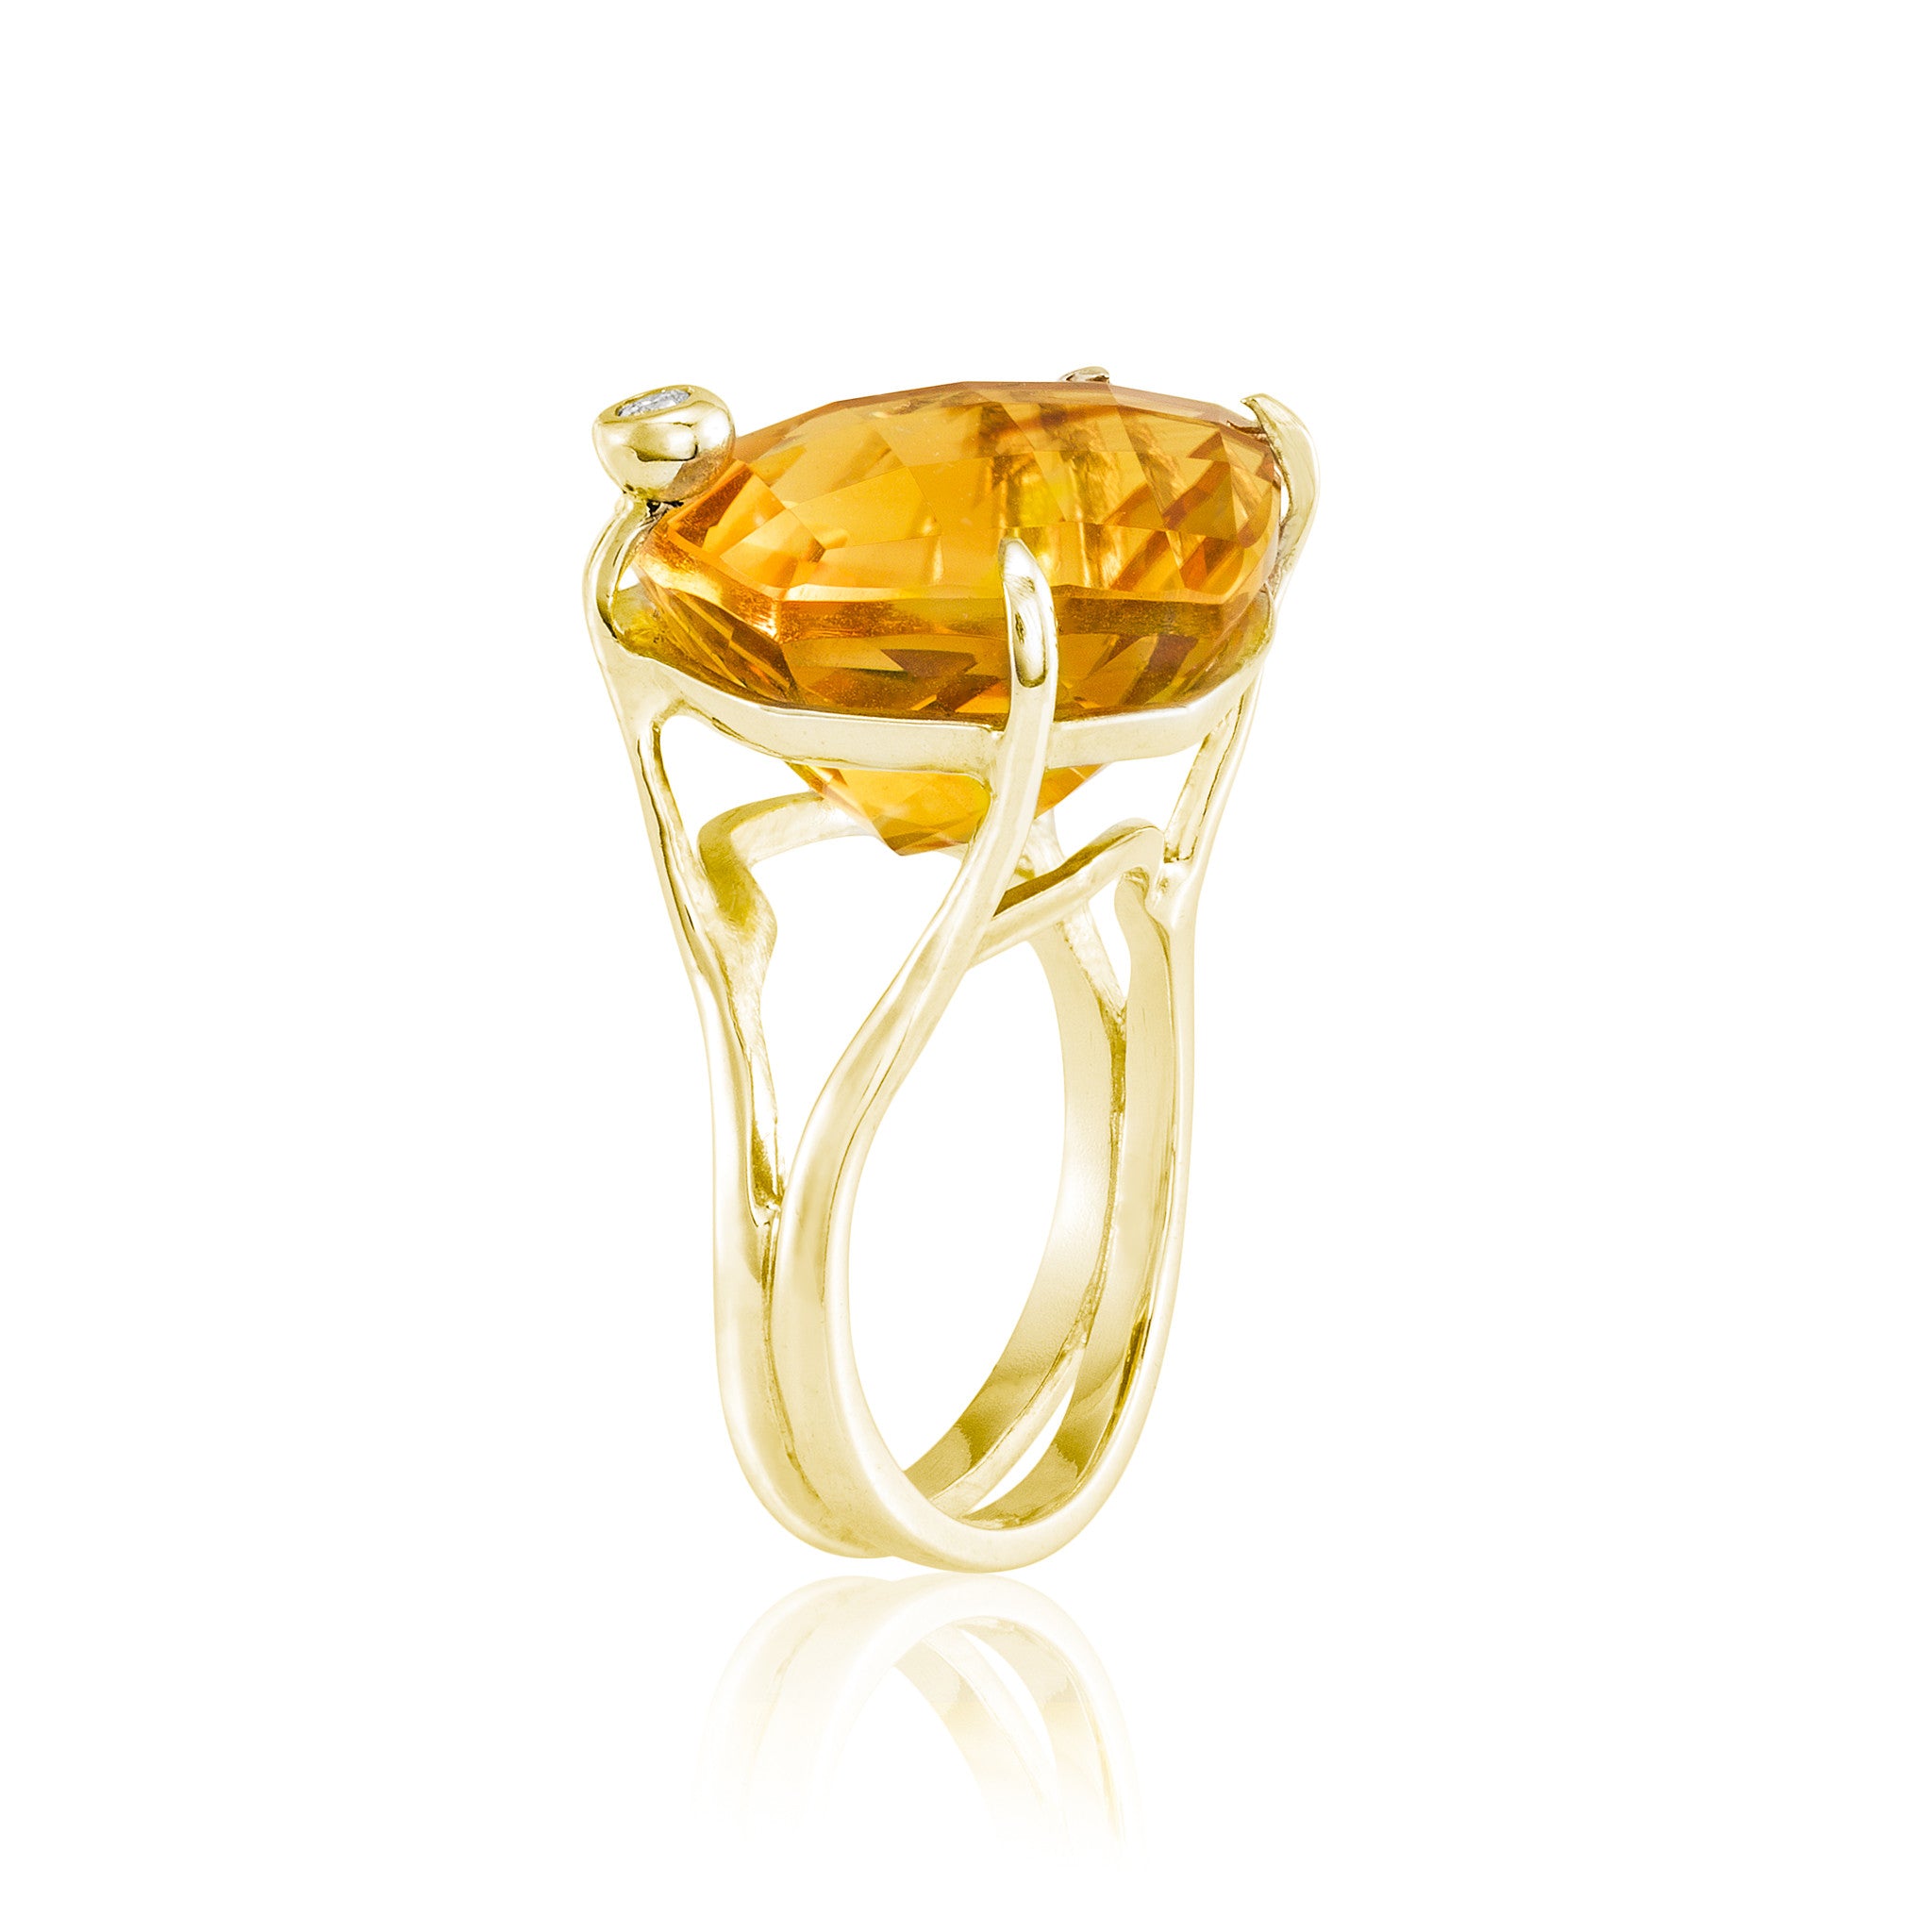 Gold Shield Cocktail Ring: Citrine